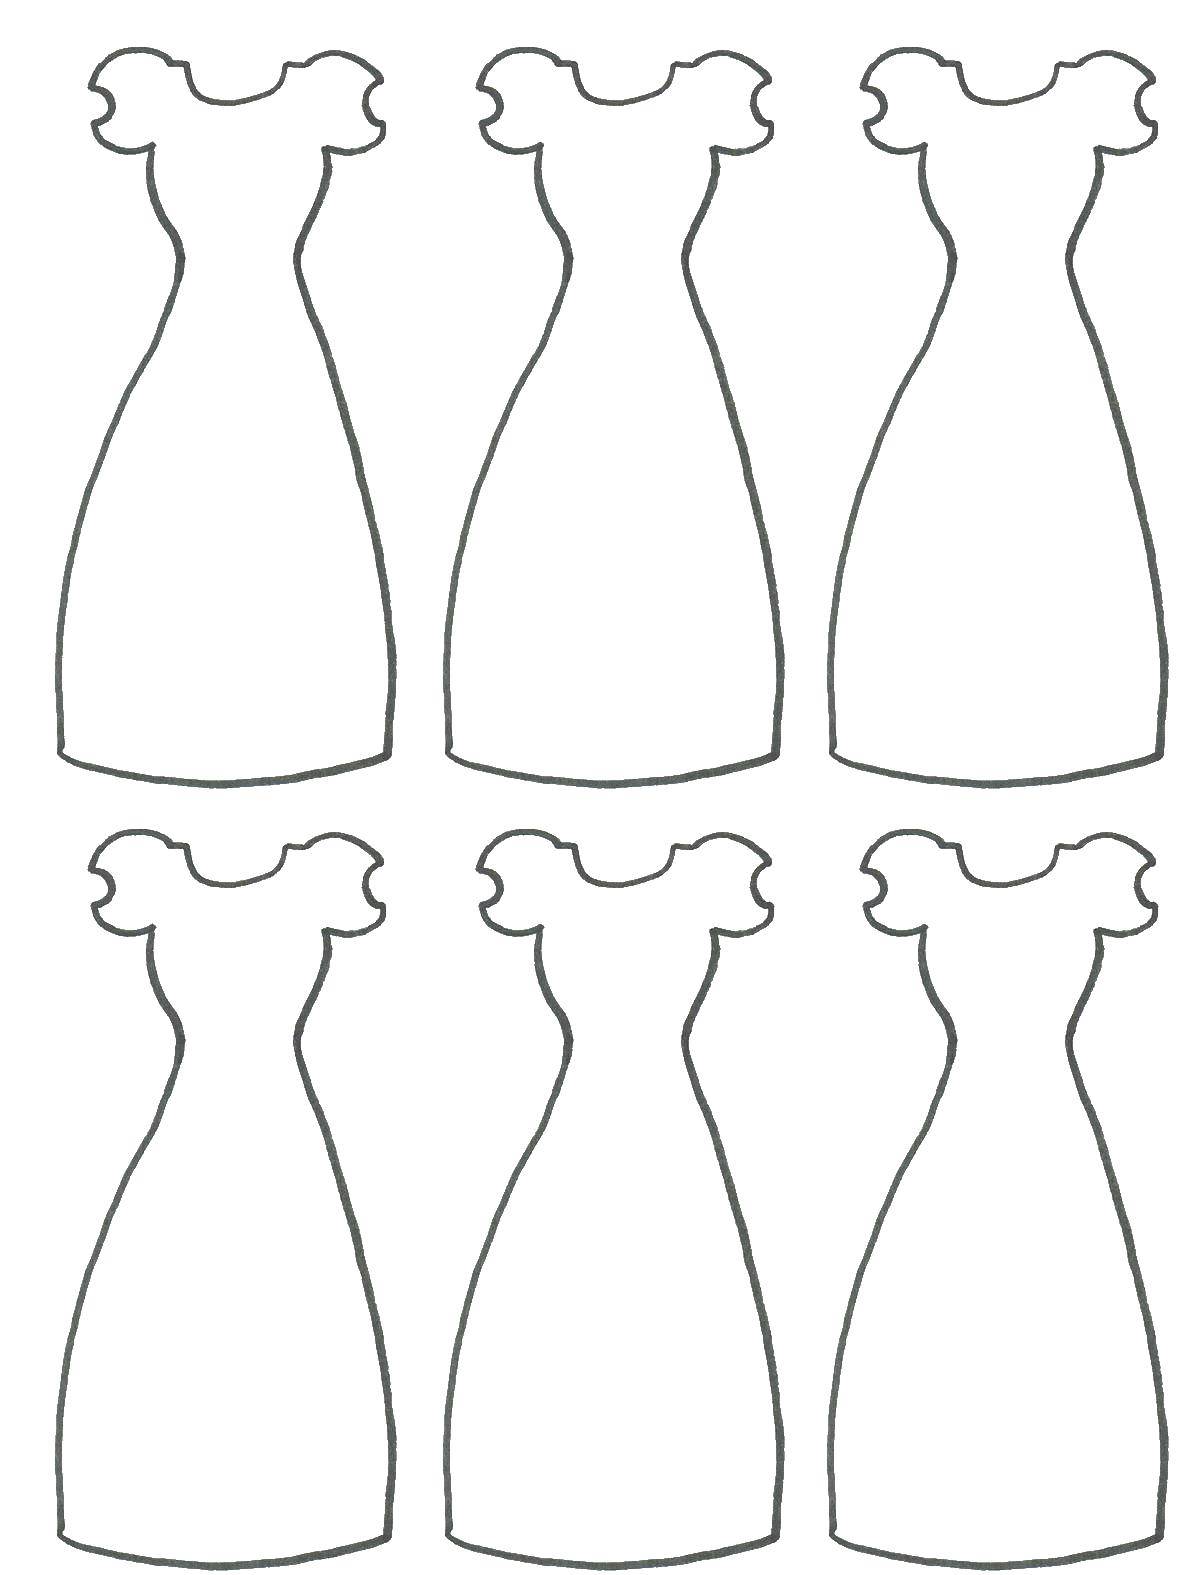 Coloring Different color for each dress. Category Dress. Tags:  Clothing, dress.